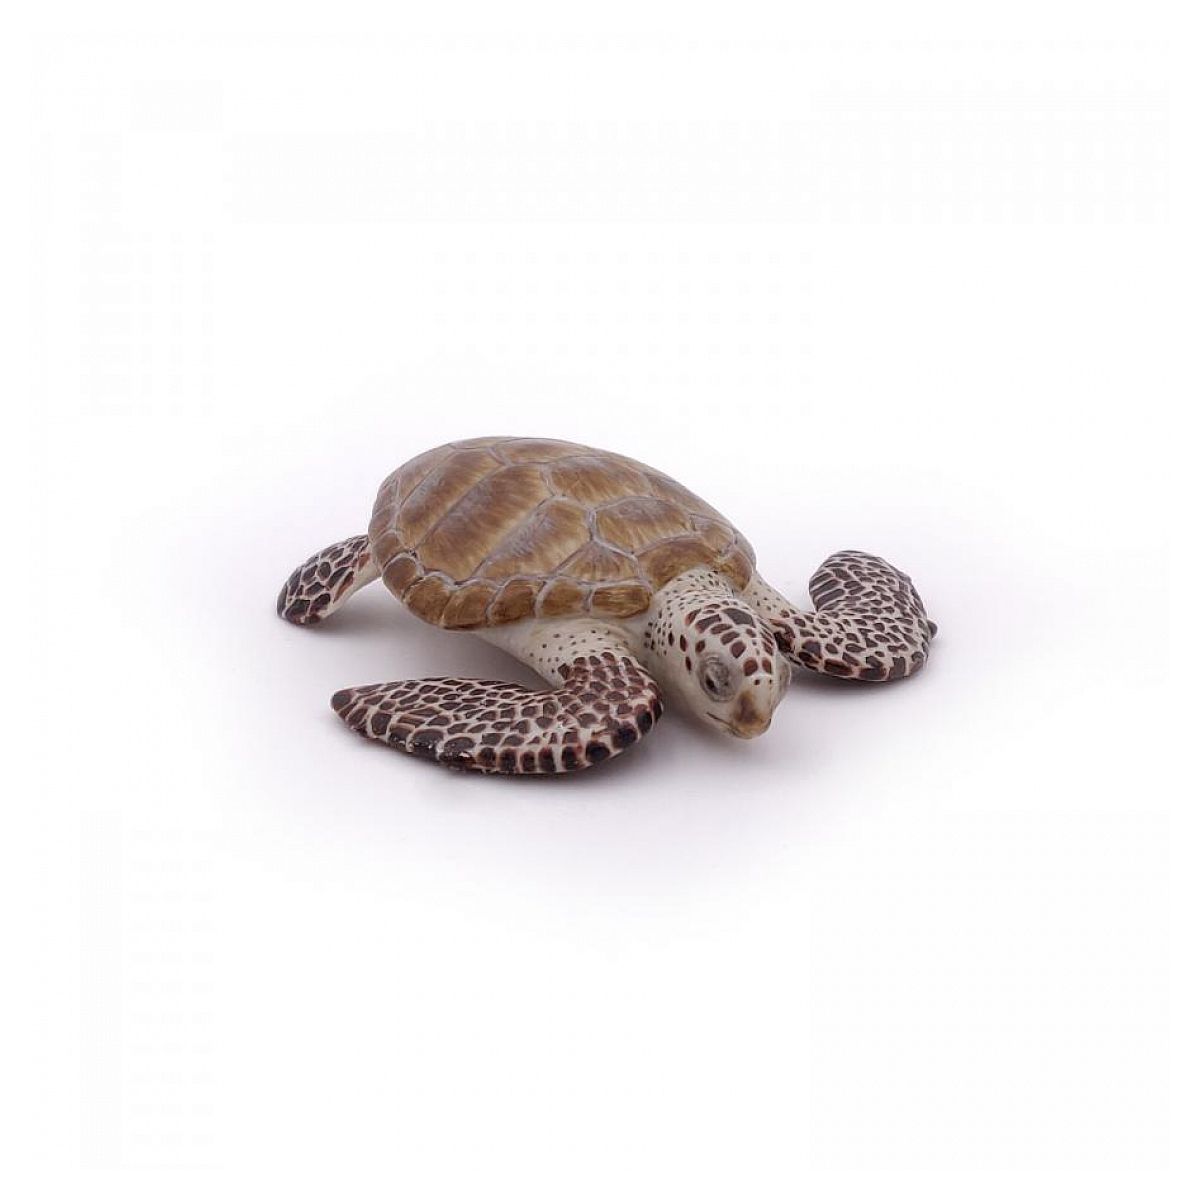 Papo 56005 Tortue caouanne figurine